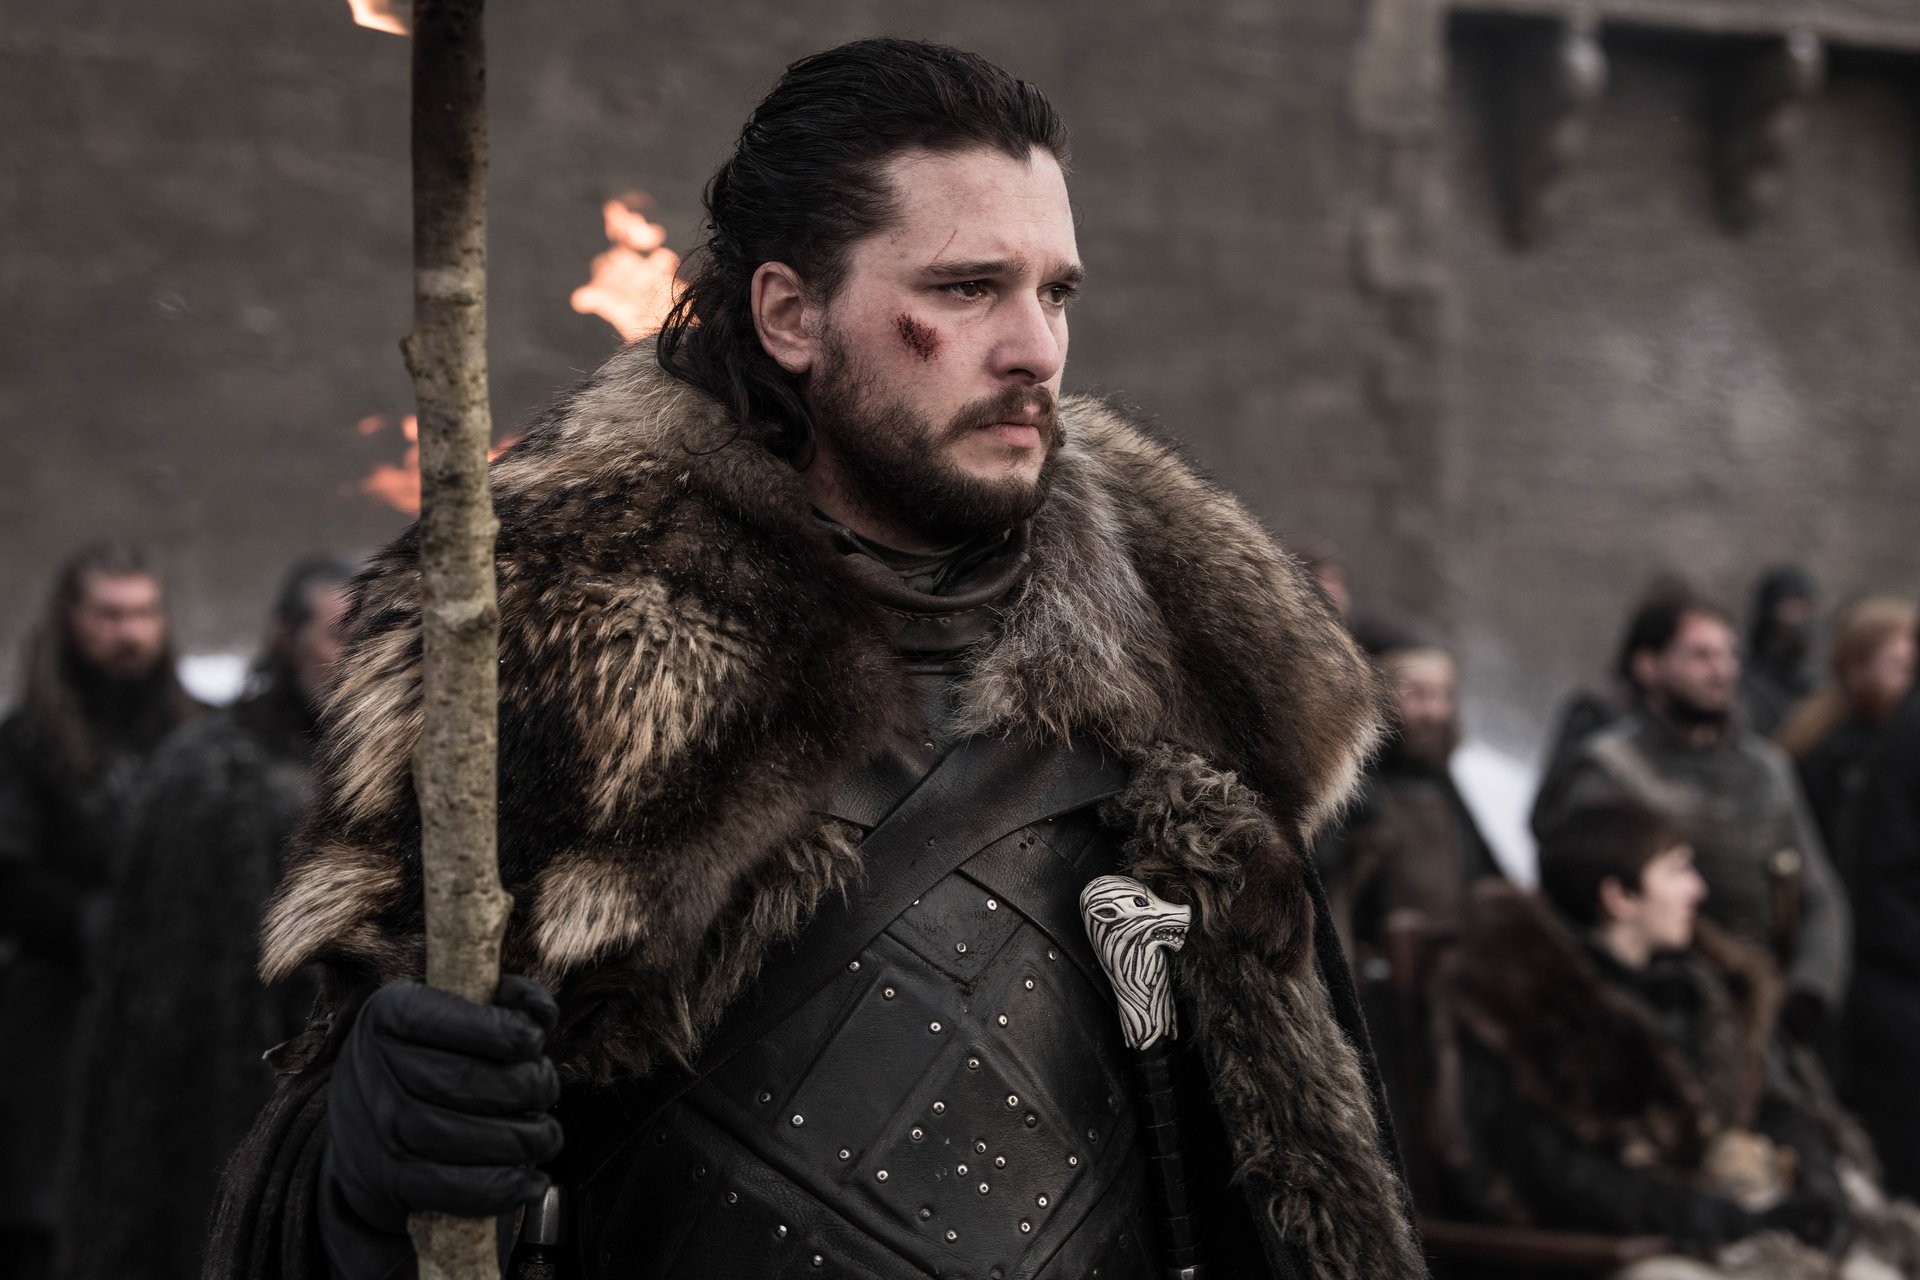 Kit Harington as Jon Snow, the subject  'Game of Thrones' theories ahead of his  spinoff. In the photo, he's wearing a fur cloak and standing in front of people while holding a torch.